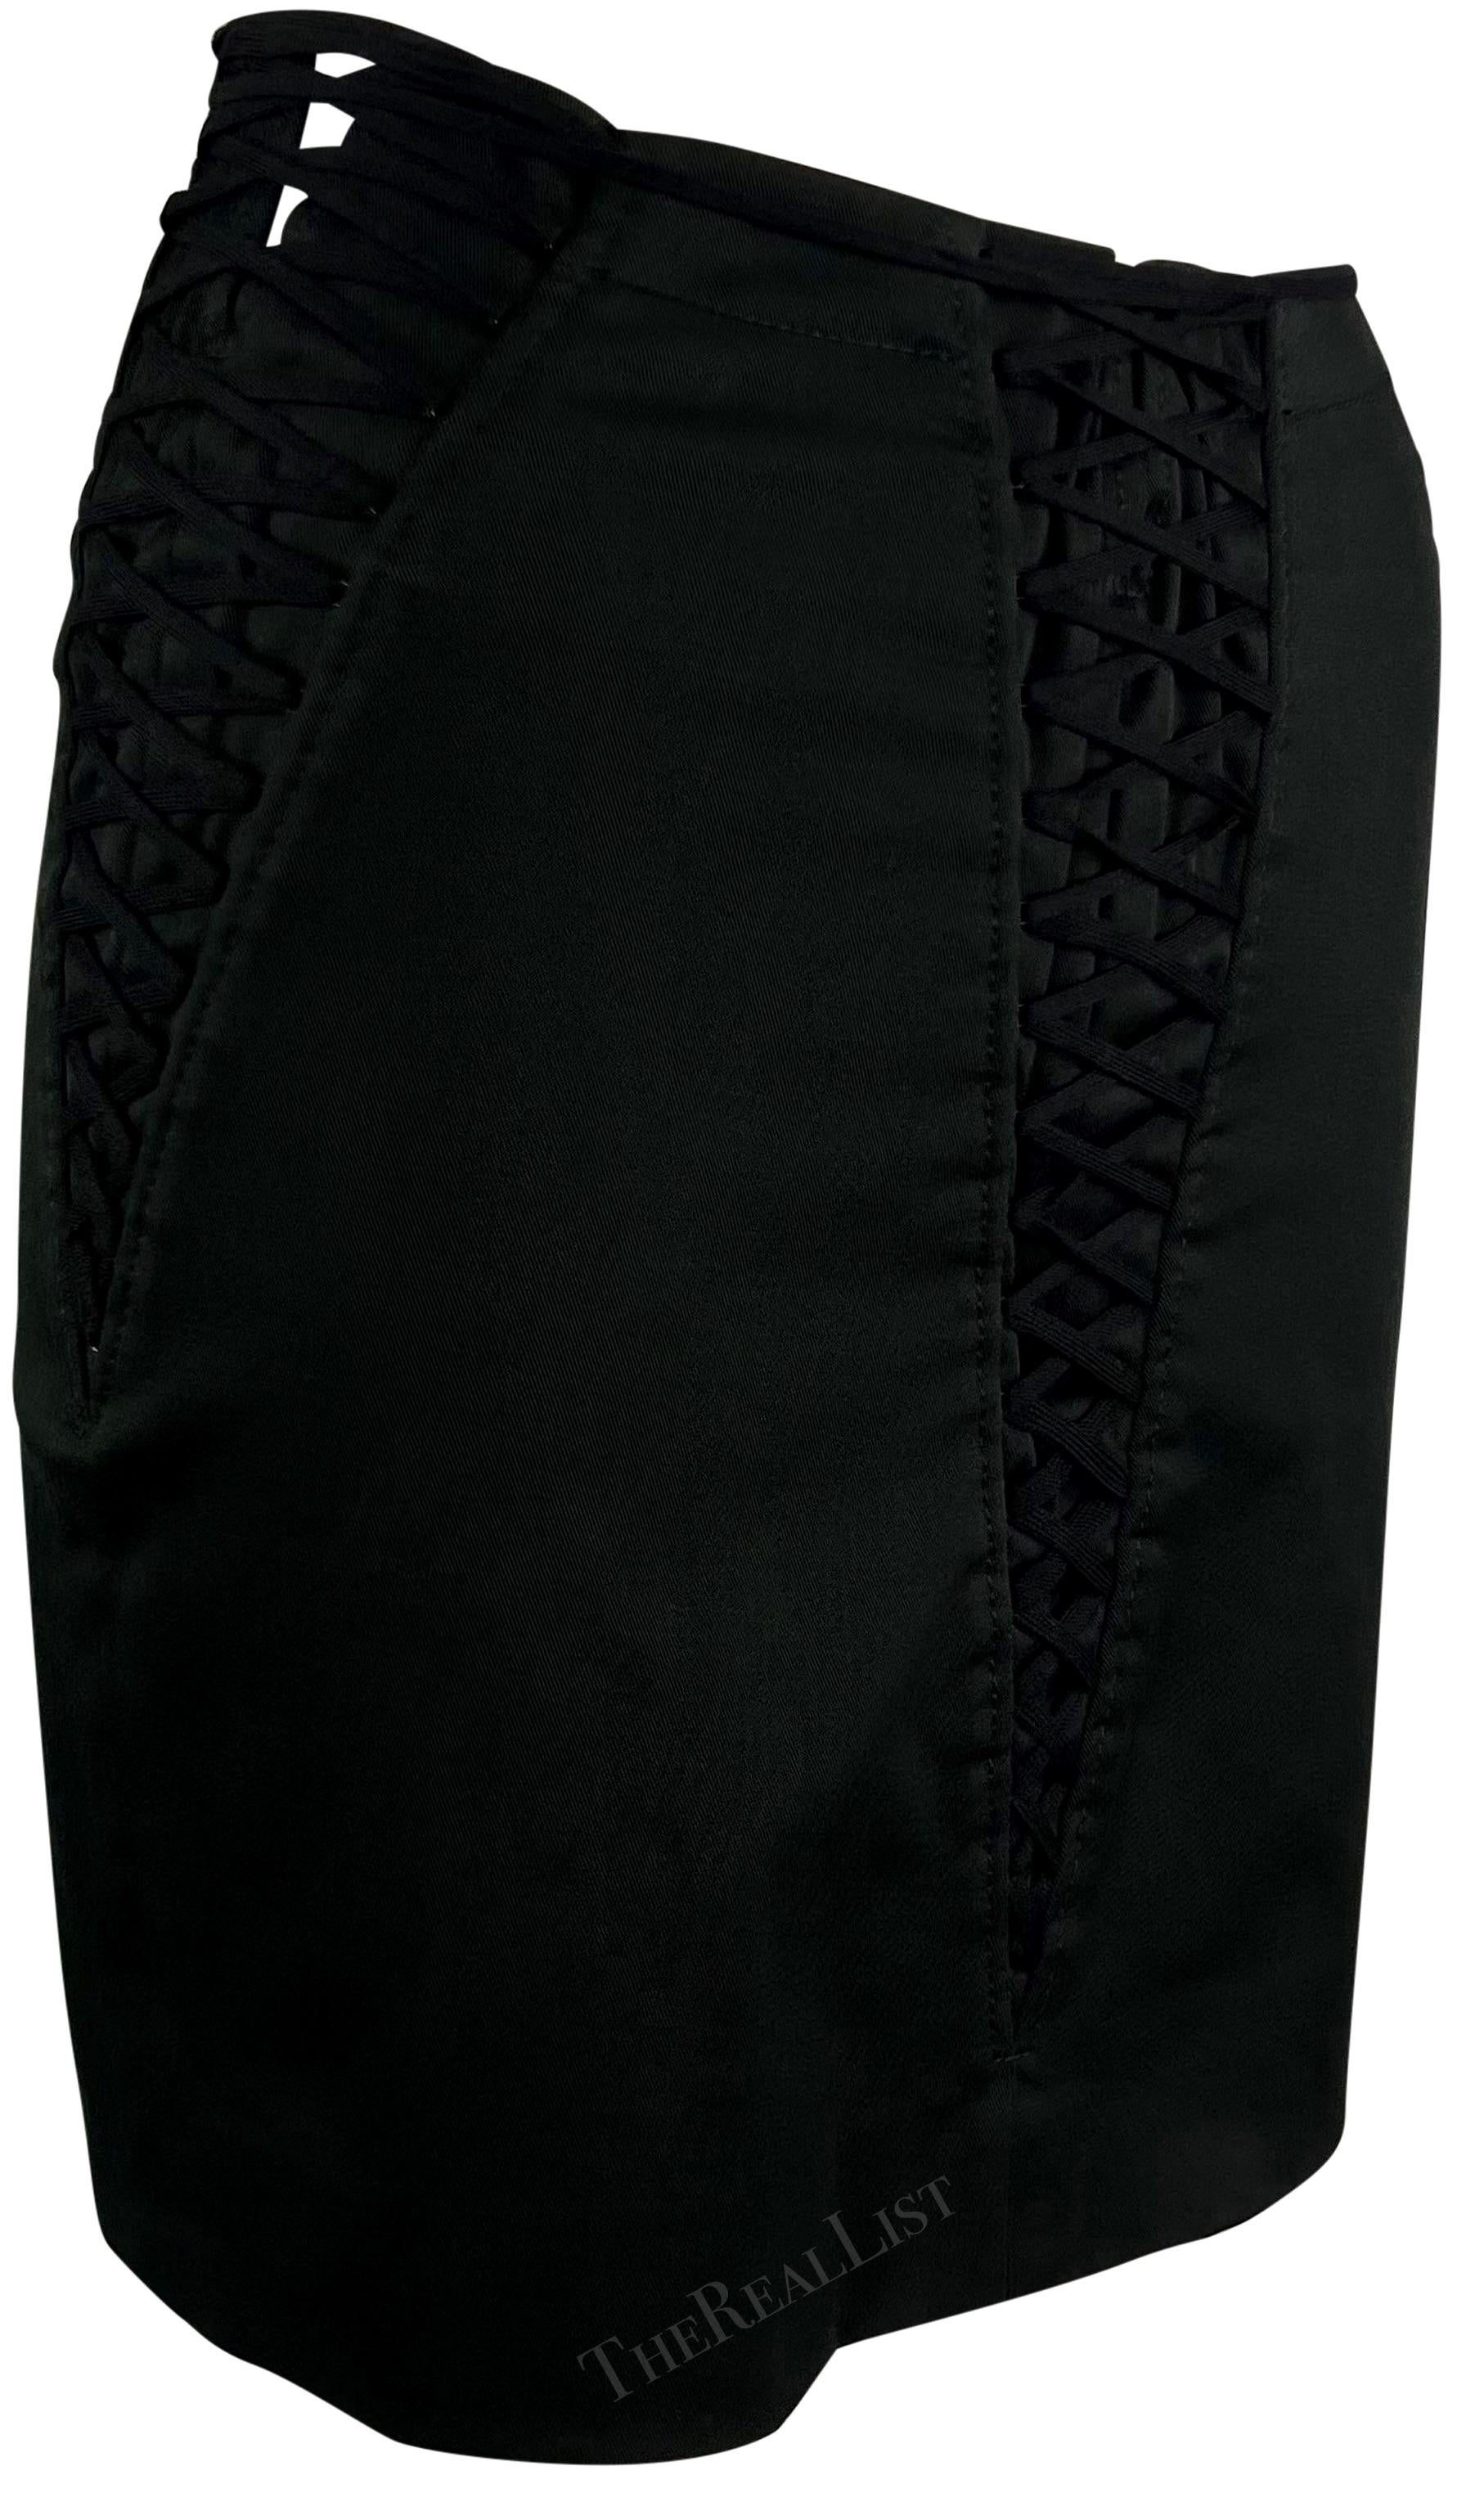 From the Spring/Summer 2002 collection, this chic Dolce & Gabbana short skirt features lace-up details on the front and sides that tapers off to create a v-shape. 

Approximate measurements:
Size - 38IT
Waistband to hem: 16